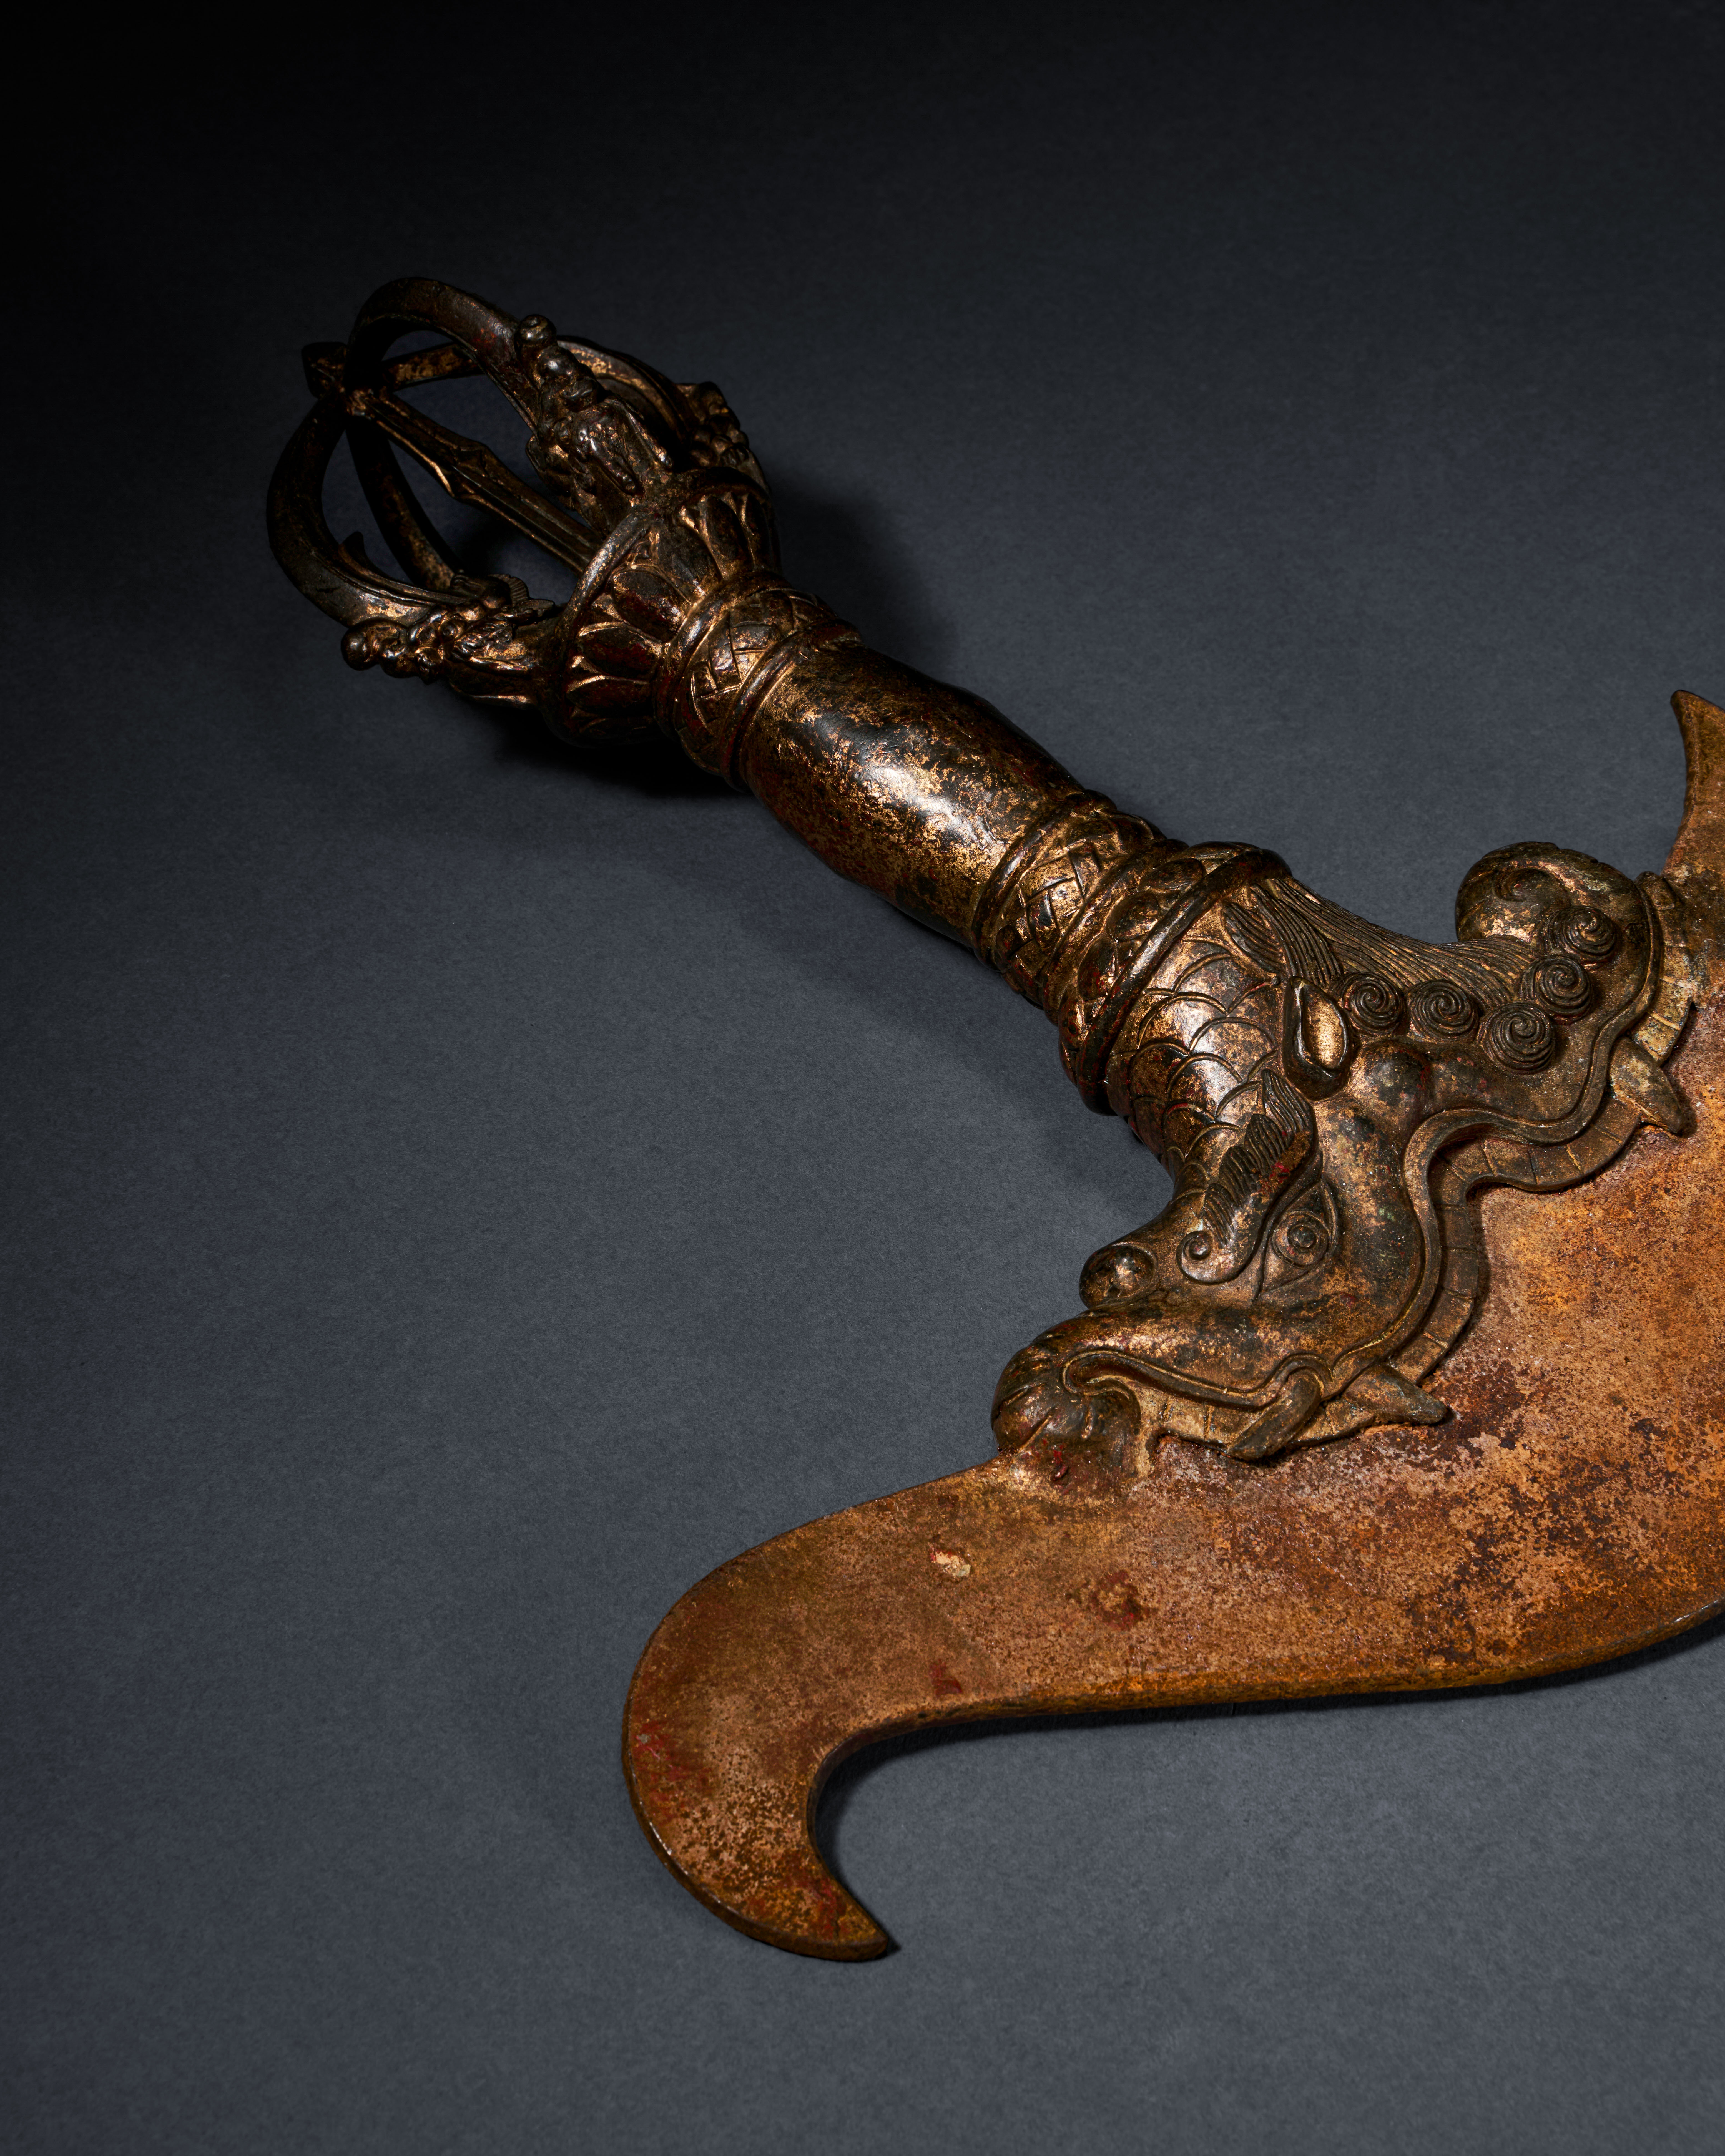 A TIBETAN BRONZE CURVED "FLAYING" KNIFE, 19TH CENTURY - Image 6 of 6